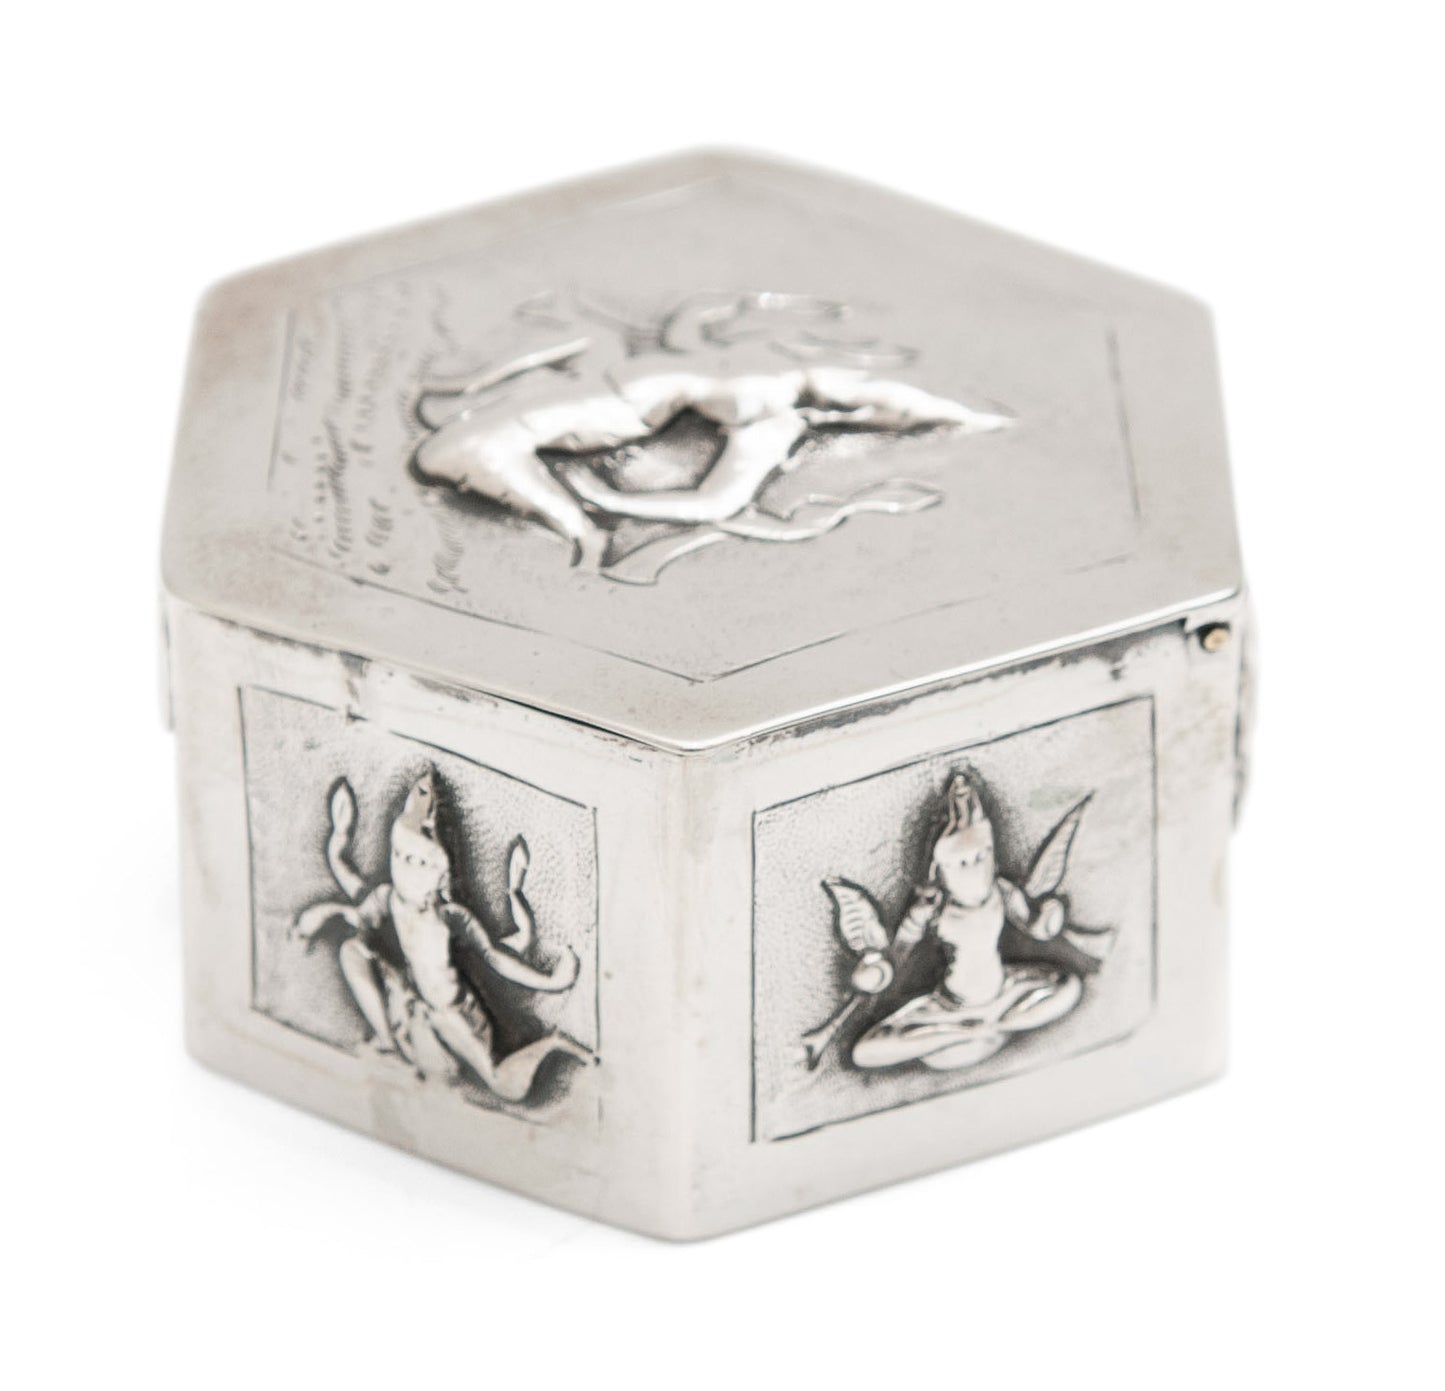 Antique Indian Swami Madras Silver Hexagonal Box with Hindu Gods & Hinged Lid (Code 1679)